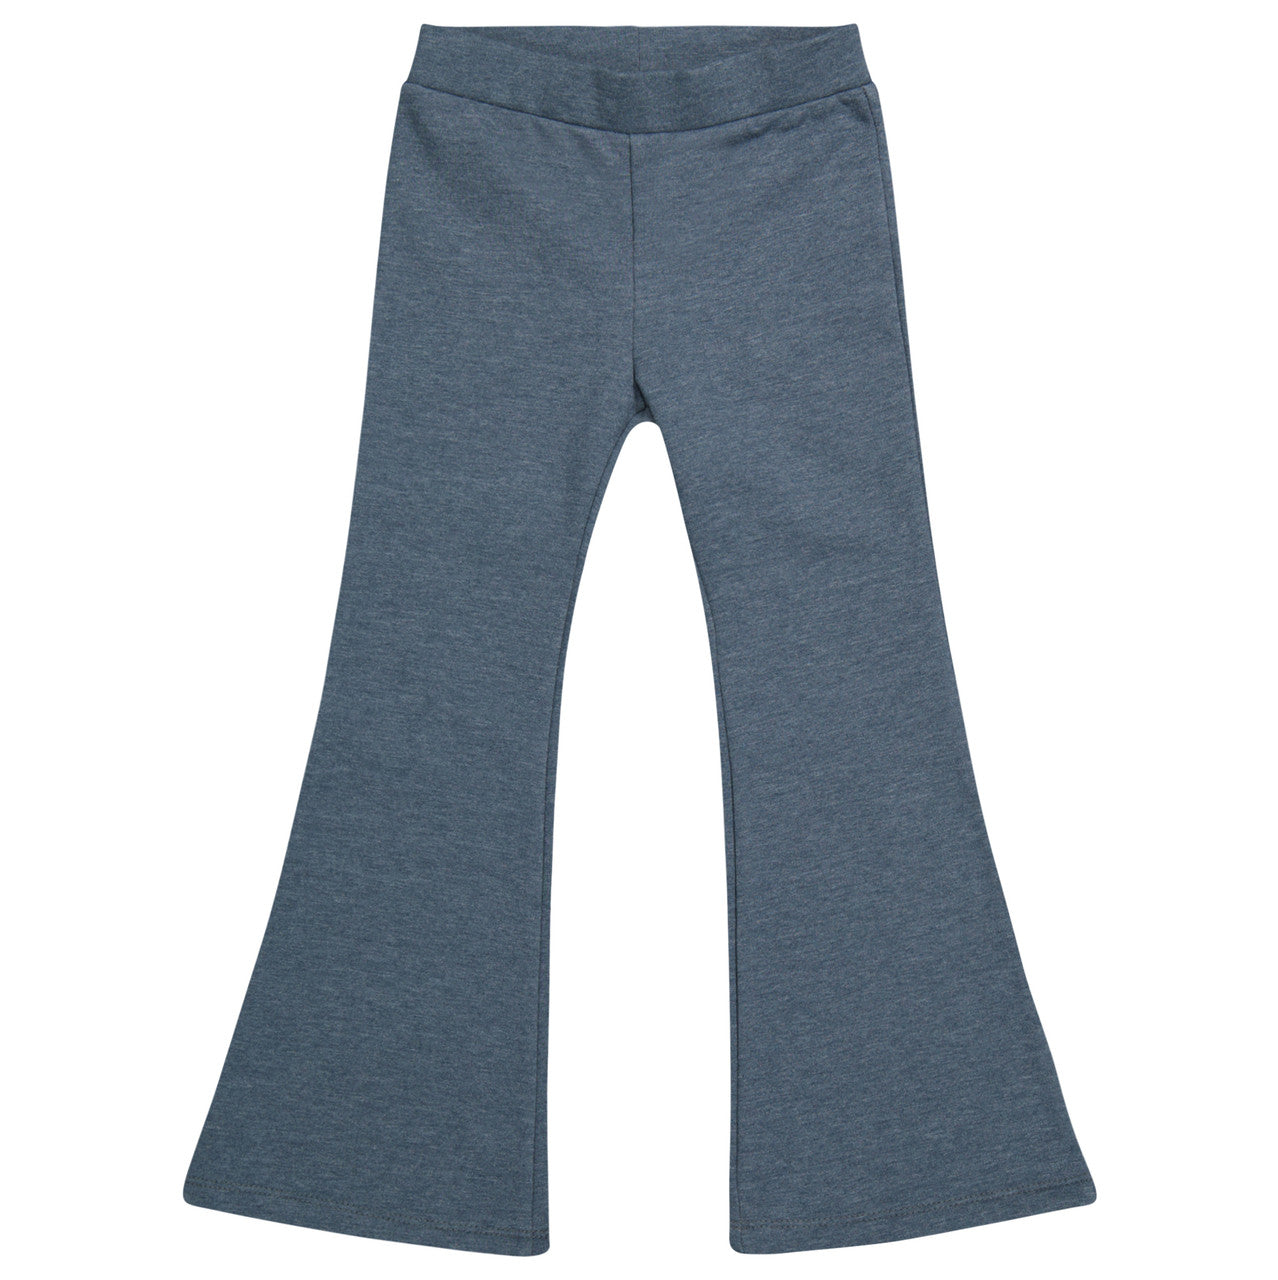 Little Hedonist organic flared leggings, made of the softest organic cotton